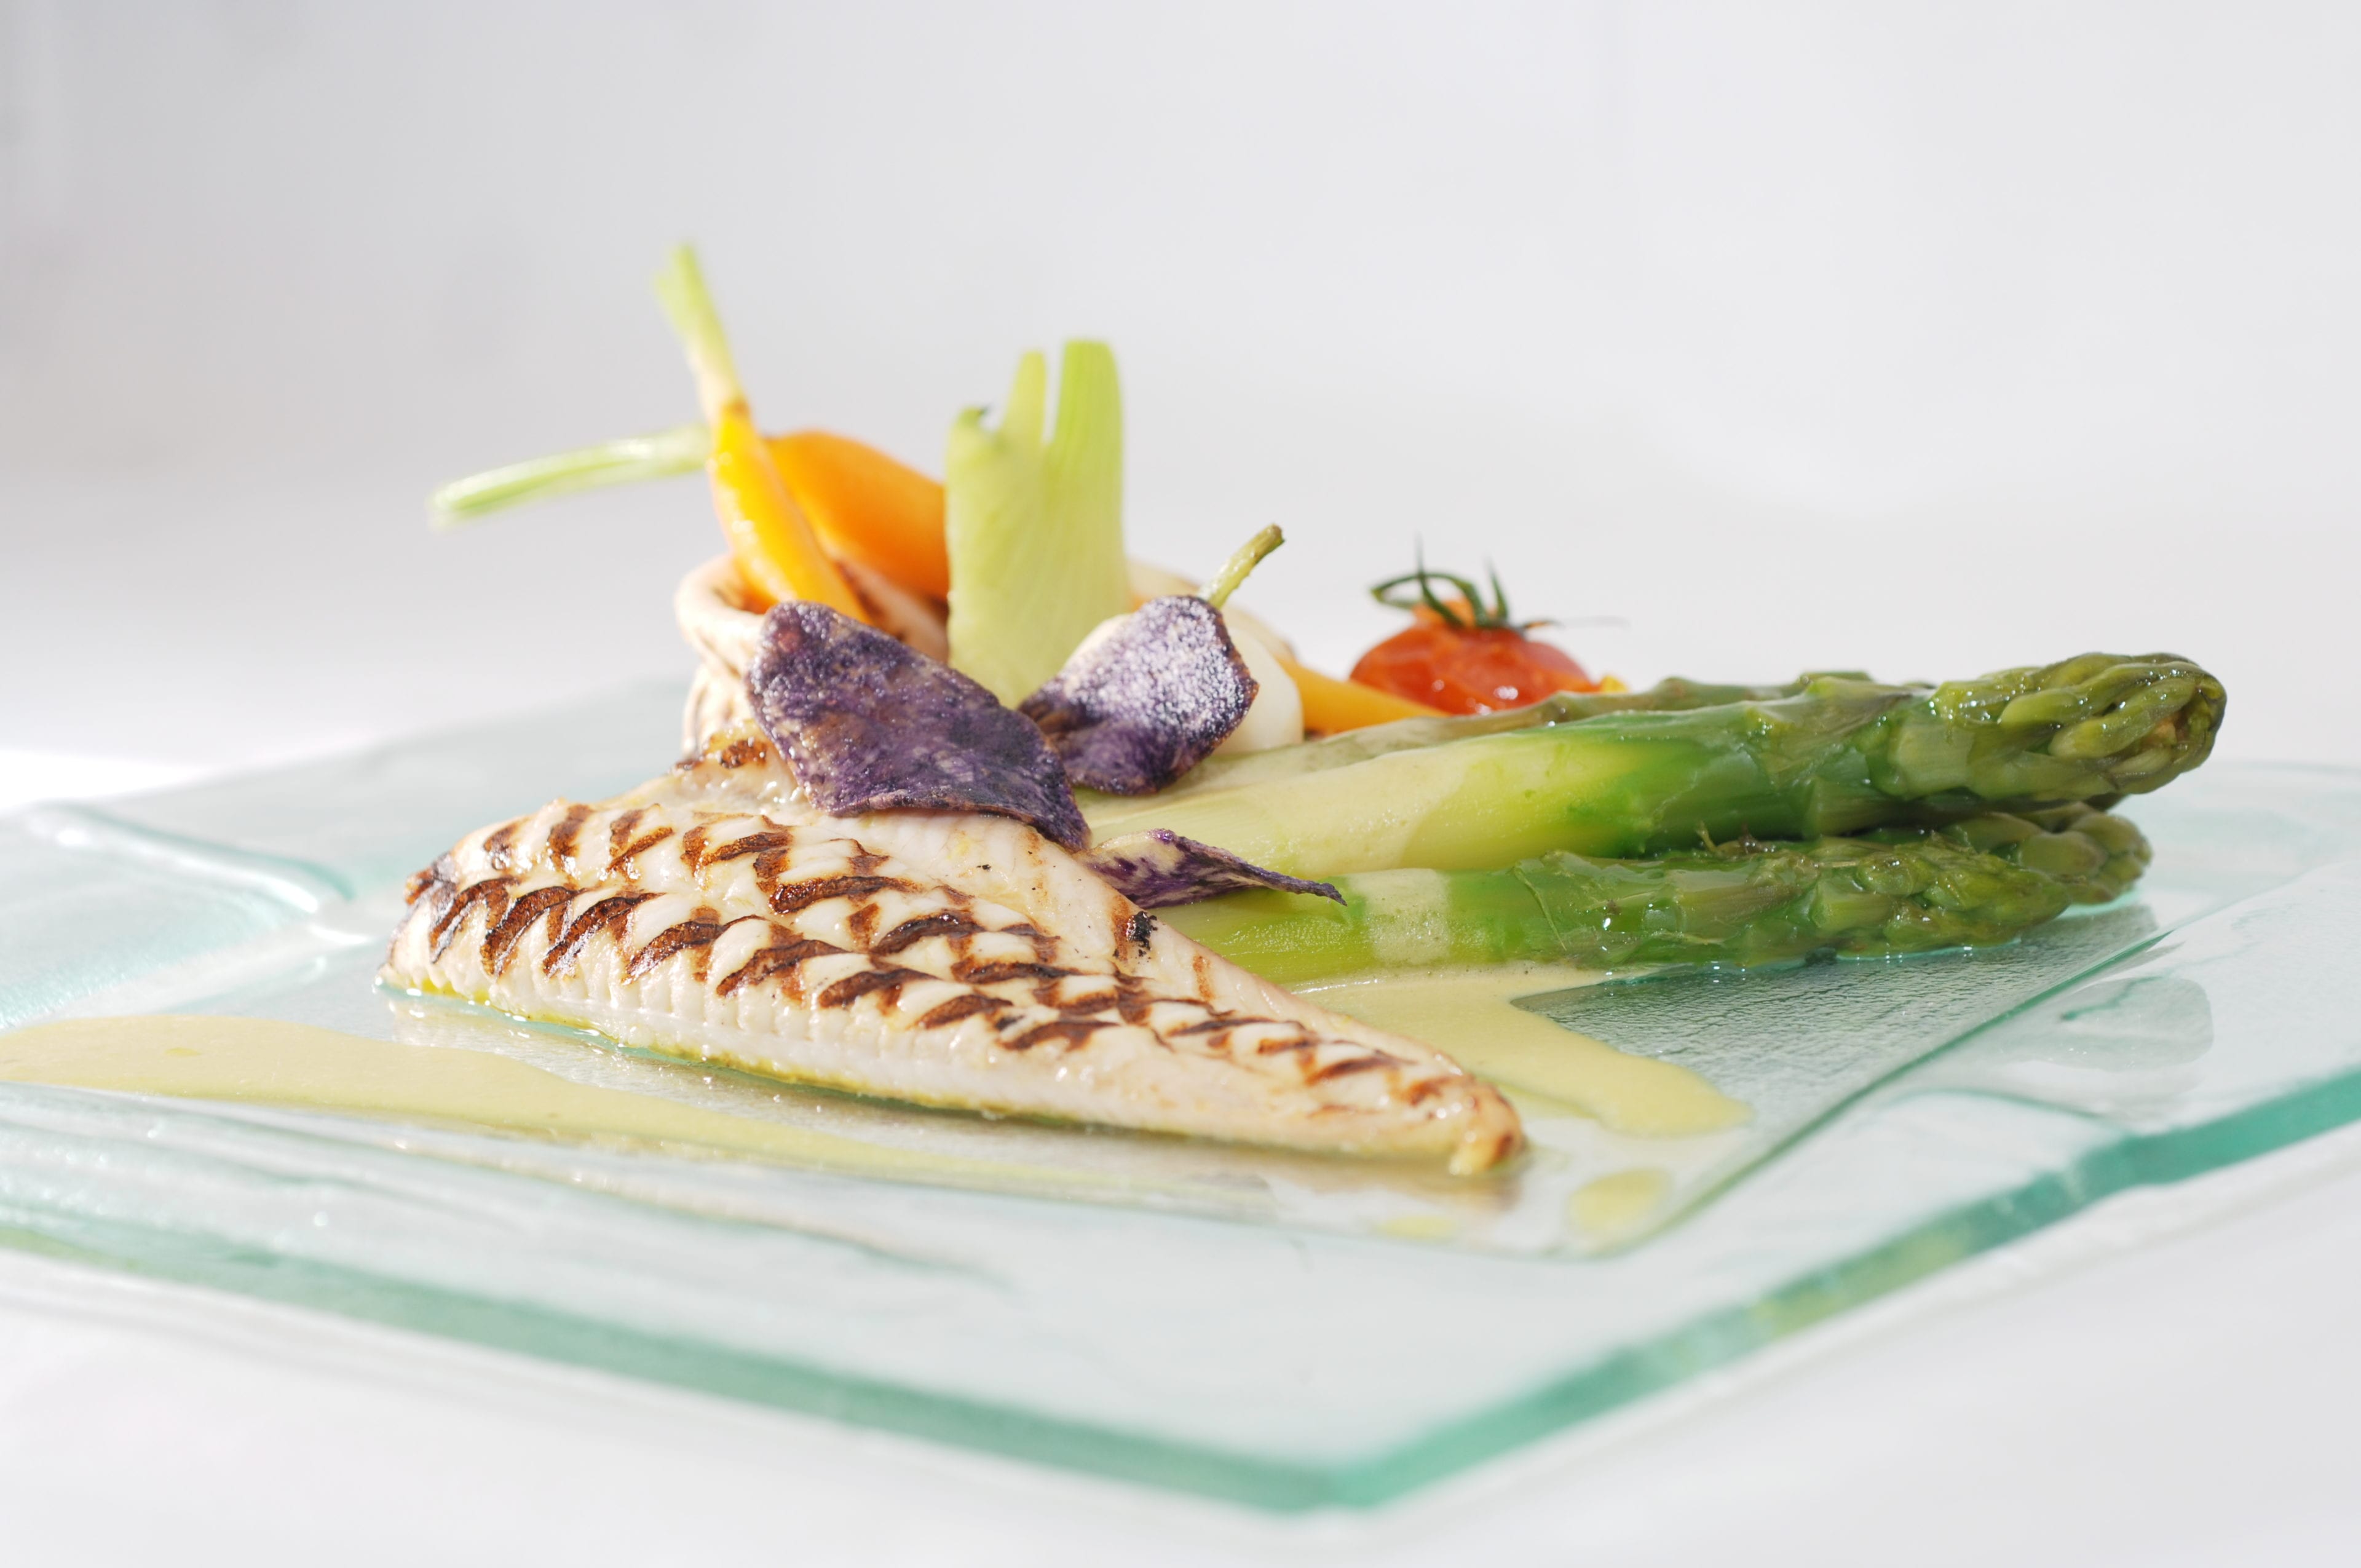 Fish on a plate with asparagus